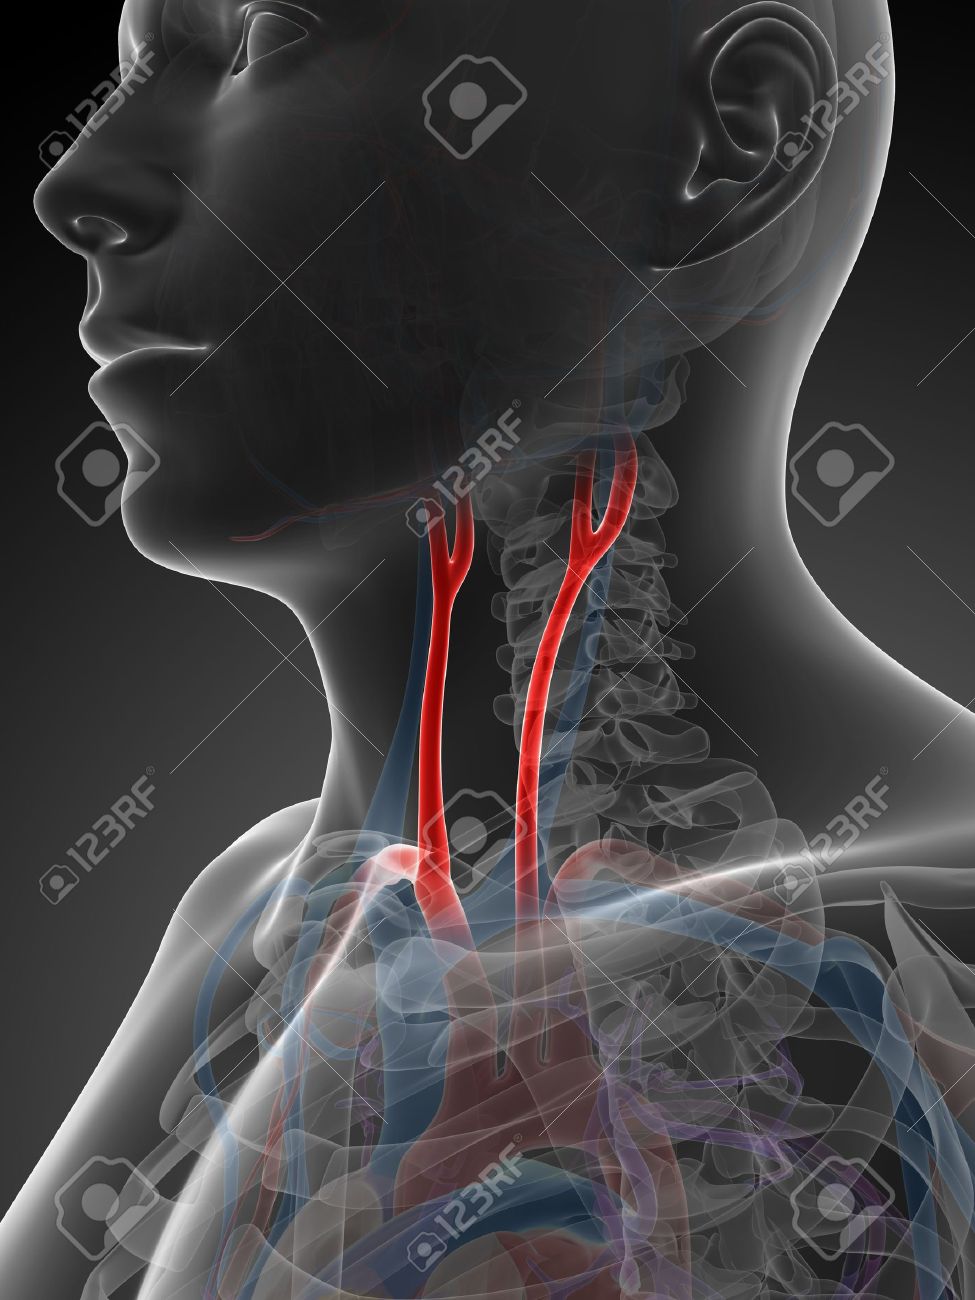 18448829-3d-rendered-illustration-of-the-carotid-artery-Stock-Photo[1]